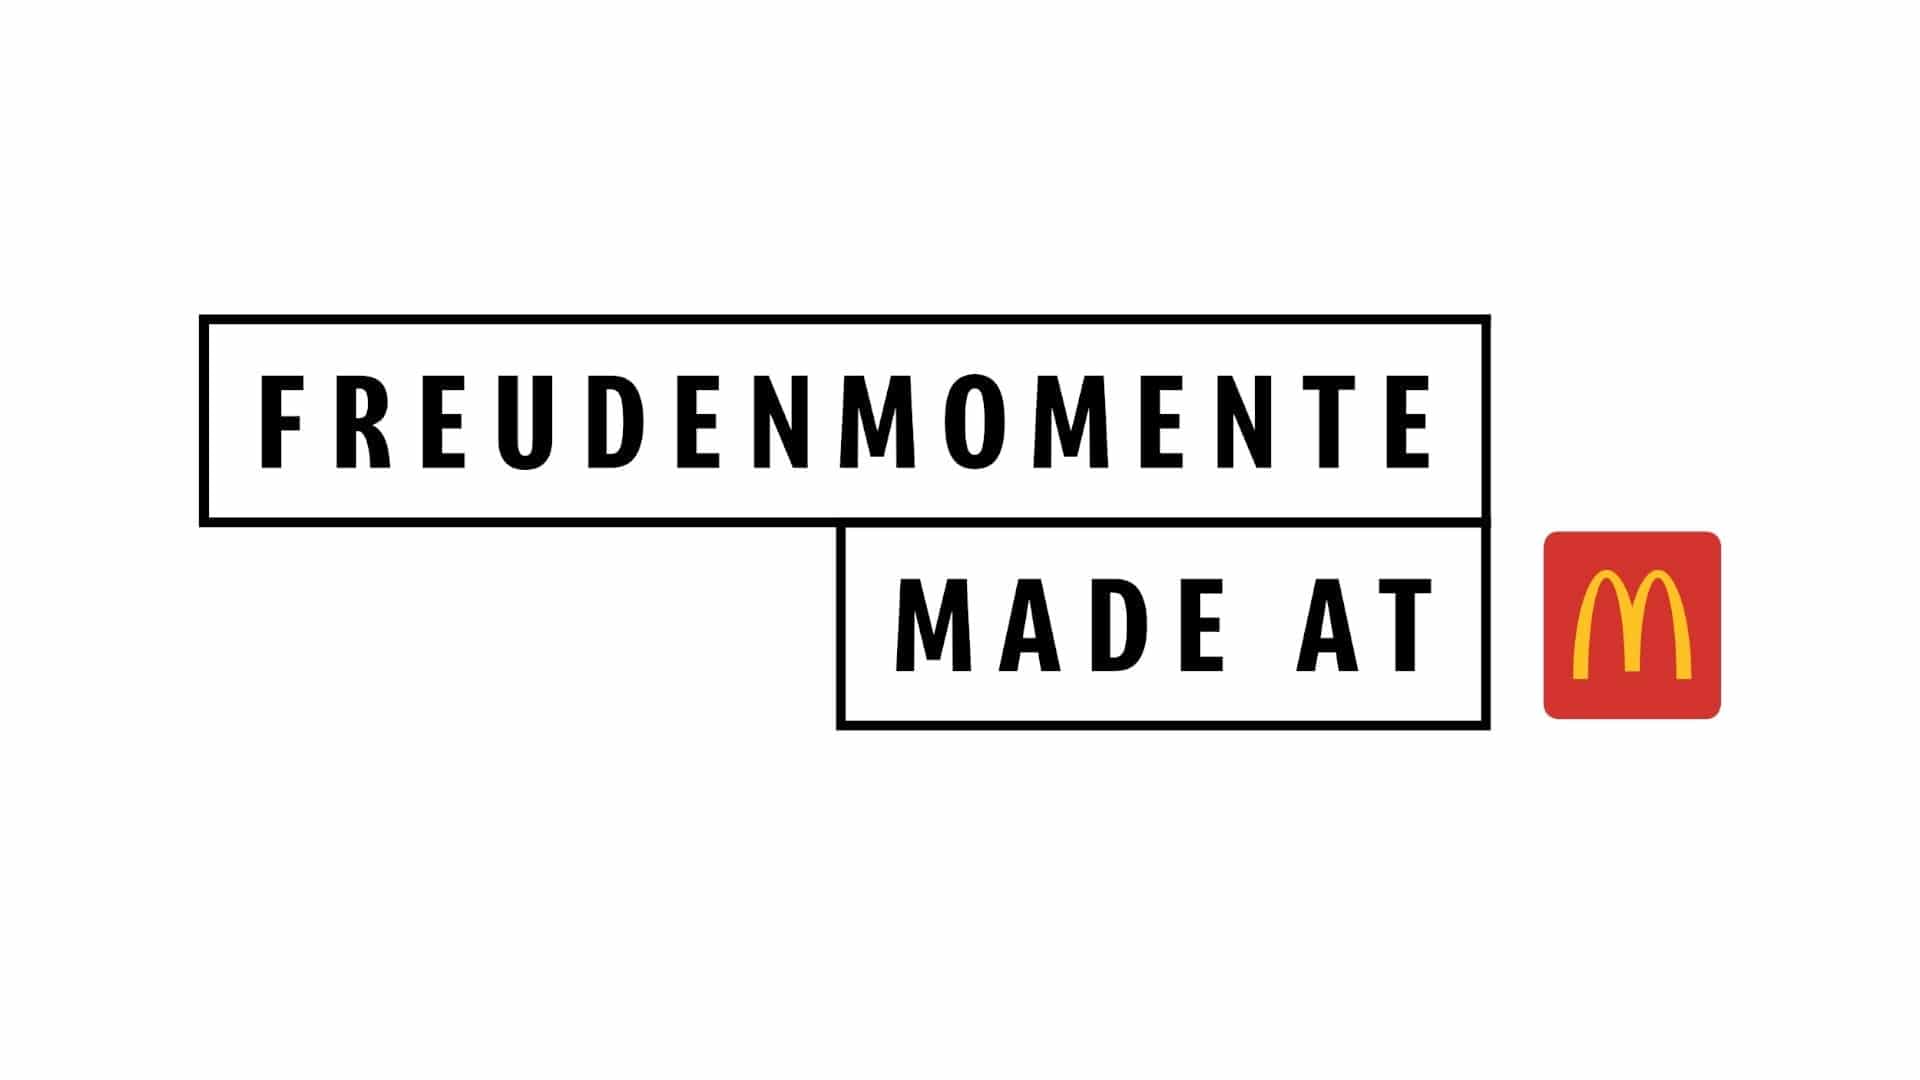 Freudenmomente made at